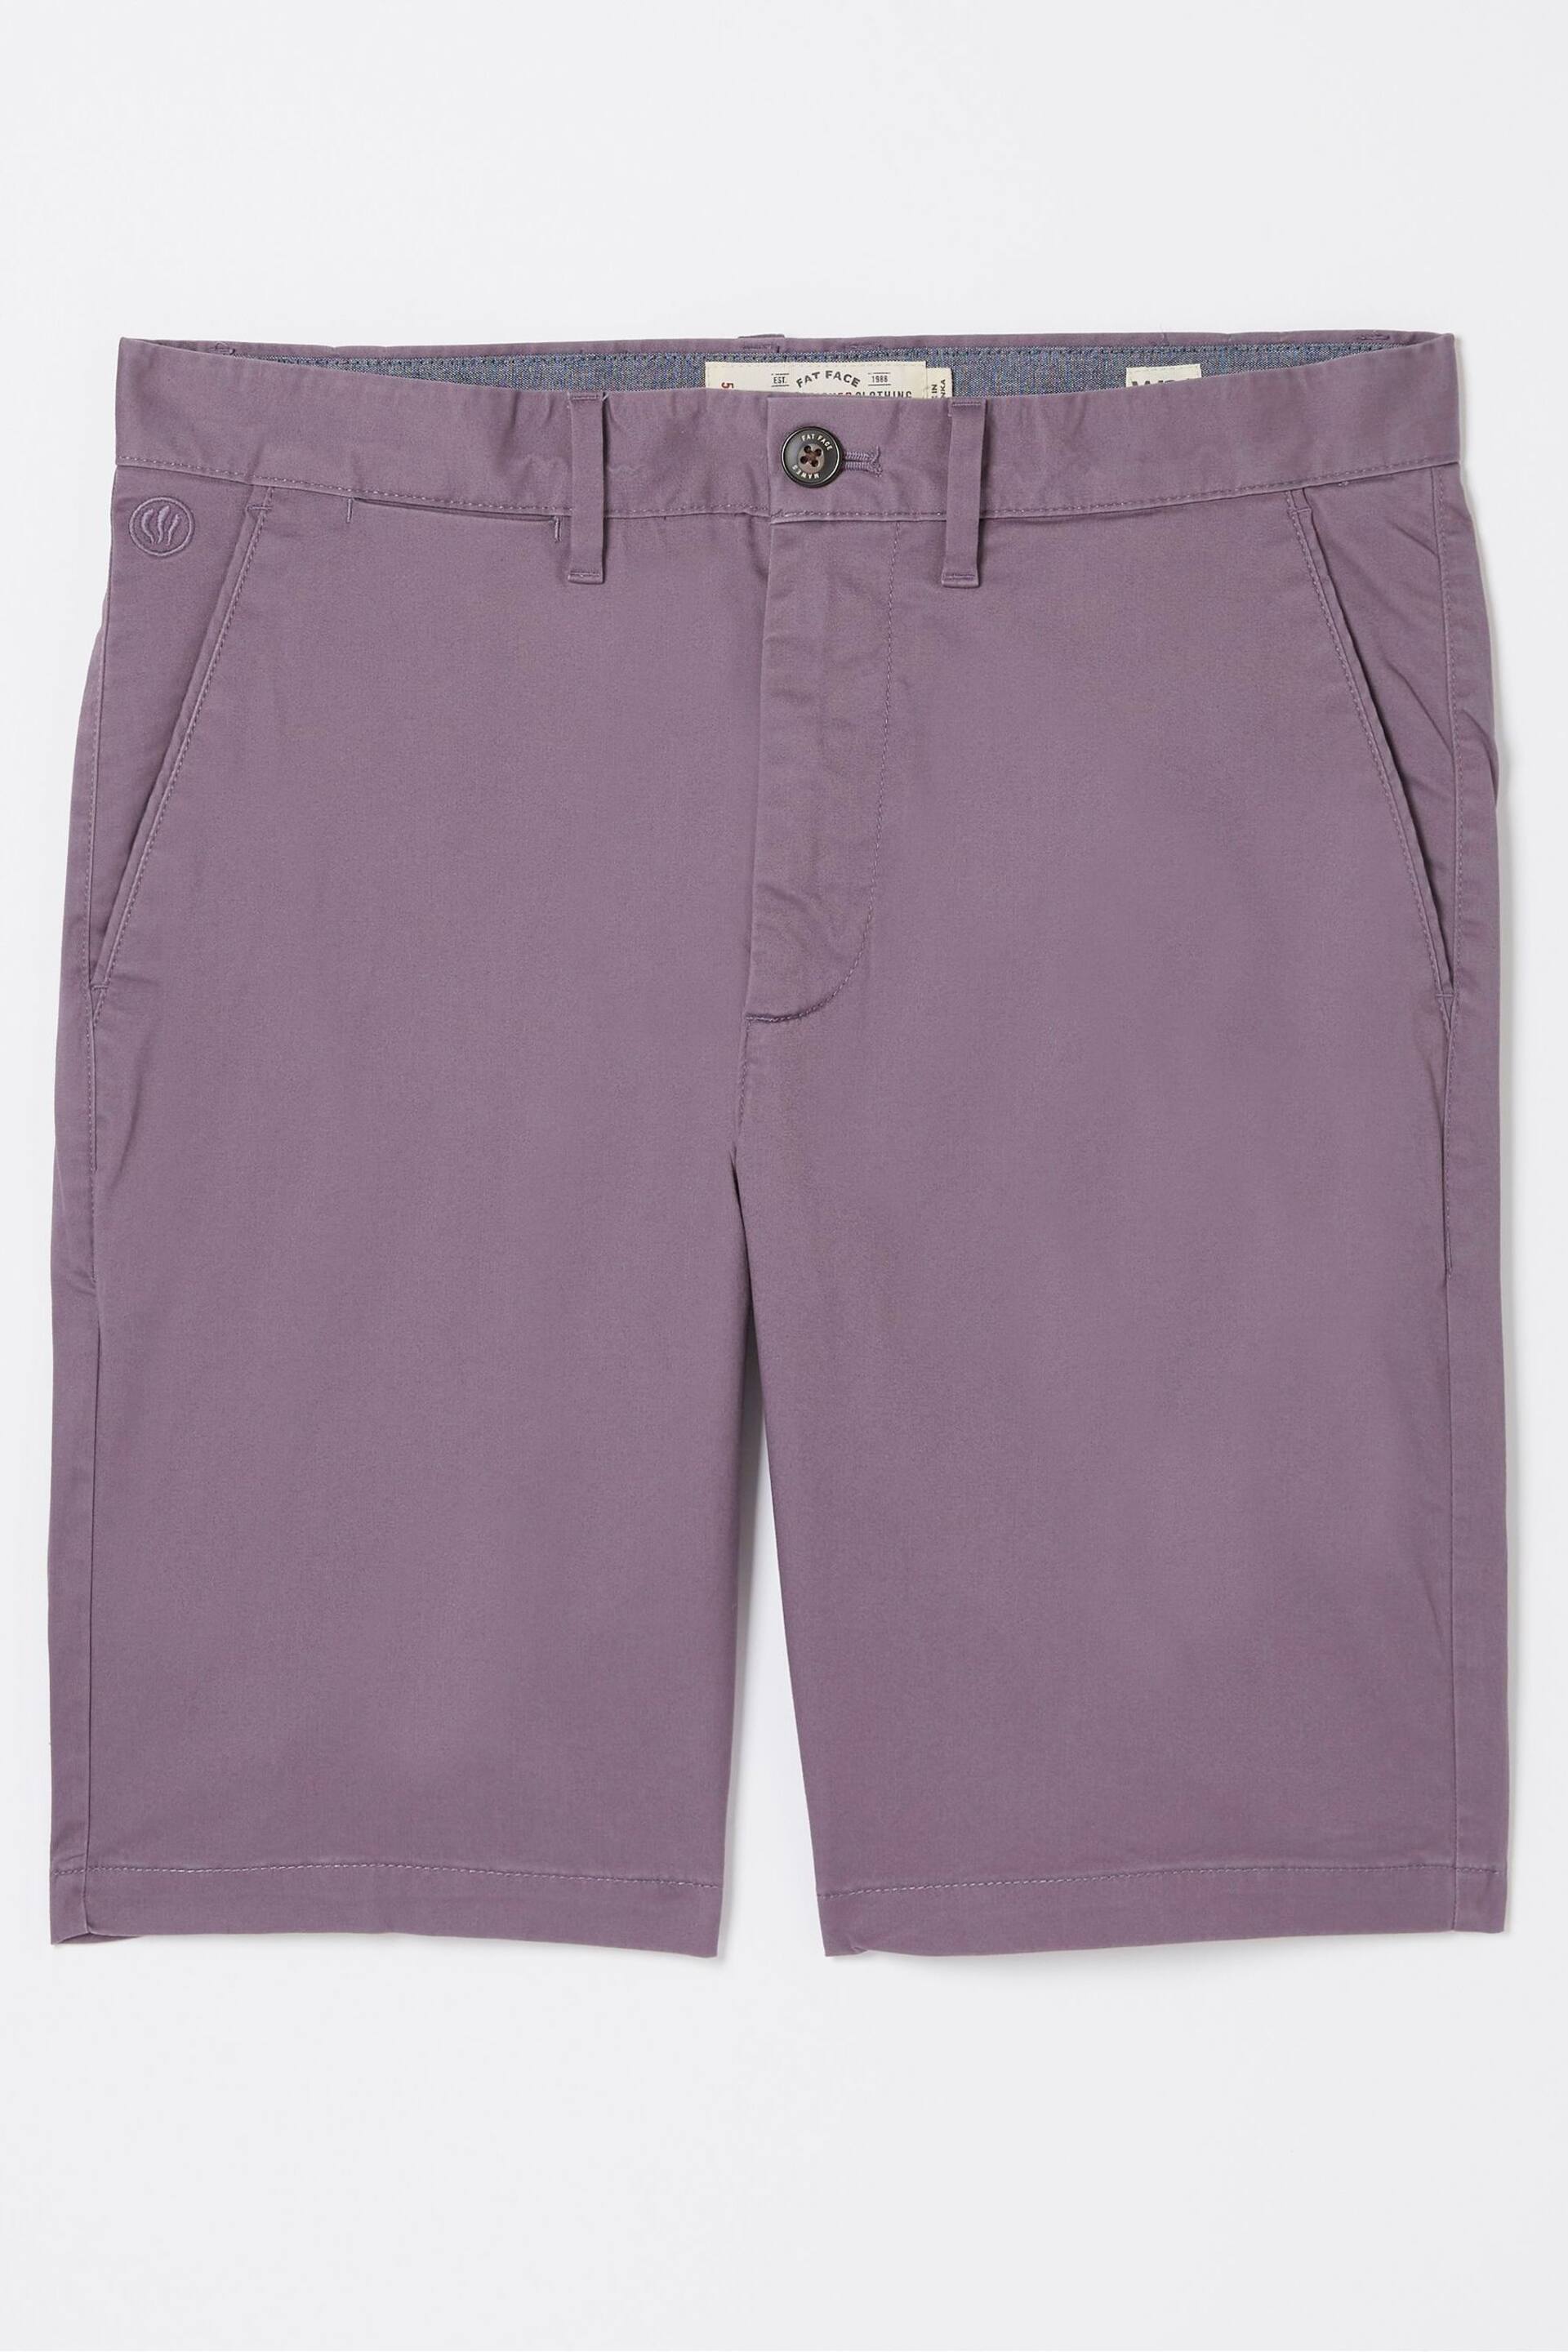 FatFace Purple Mawes Chinos Shorts - Image 5 of 5